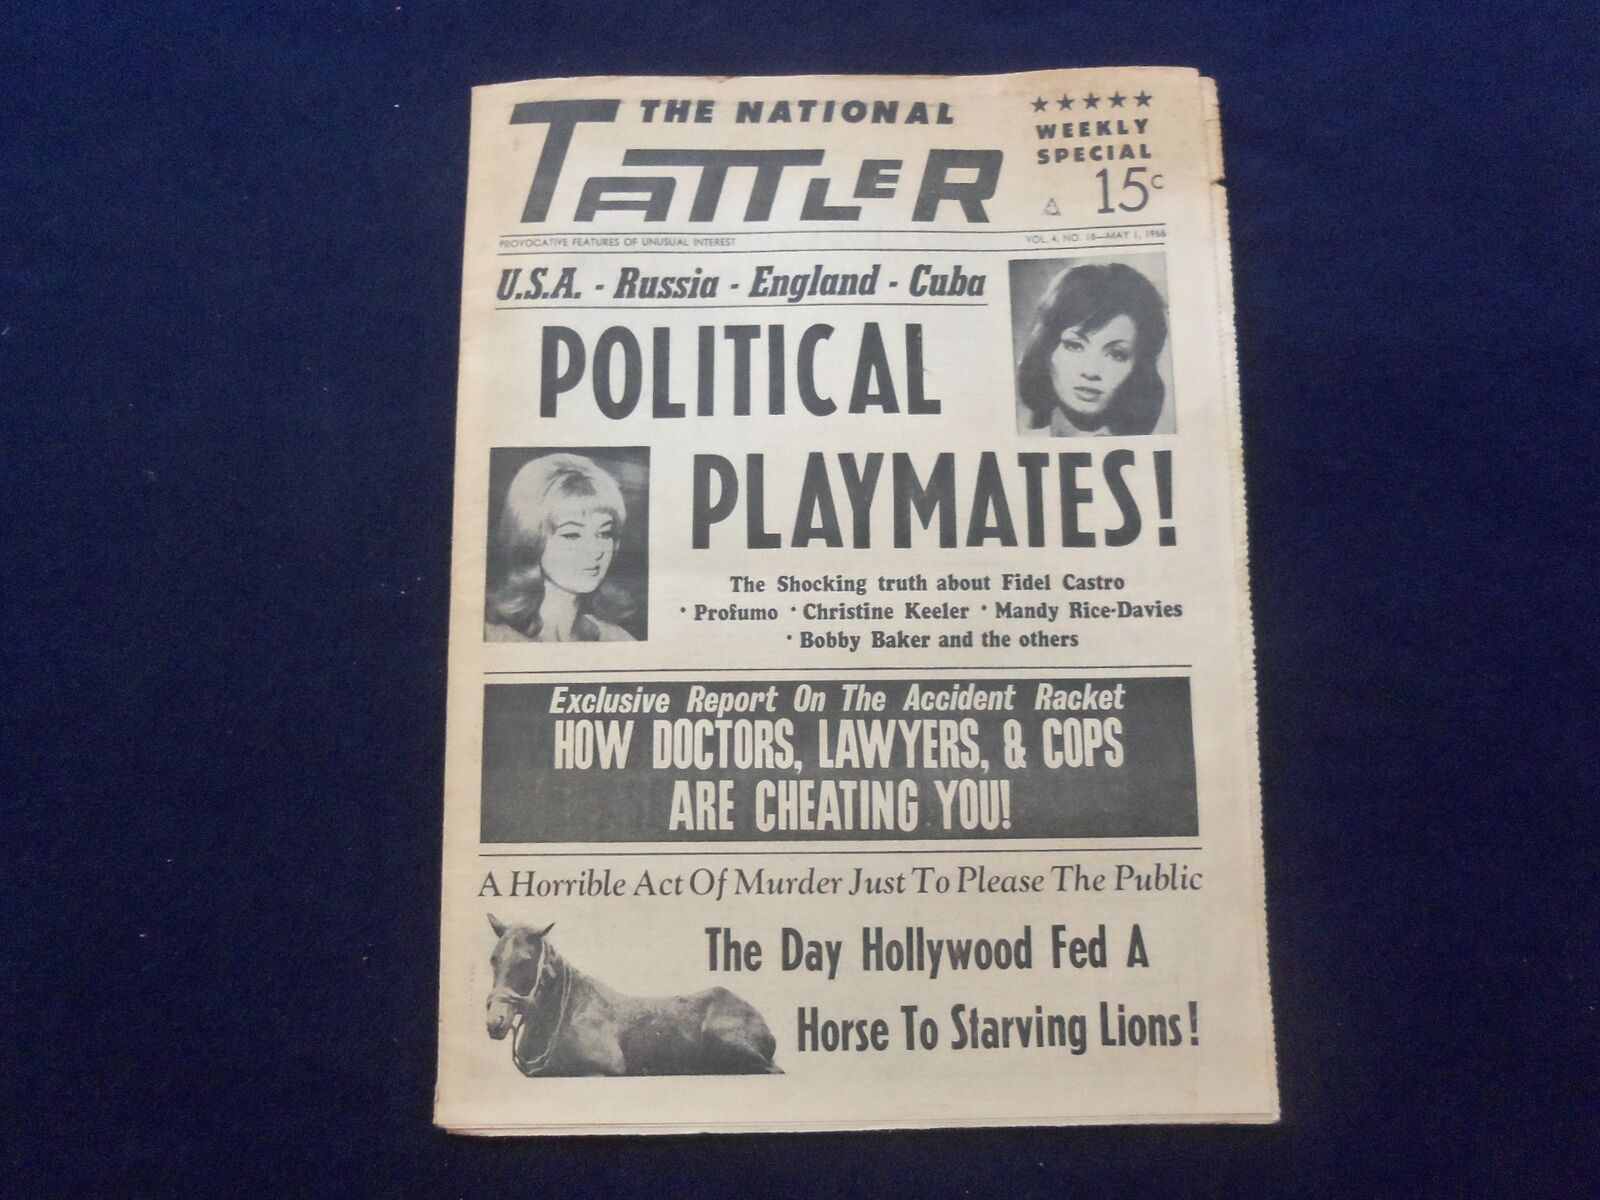 1966 MAY 1 THE NATIONAL TATTLER NEWSPAPER - POLITICAL PAYMATES - NP 6879